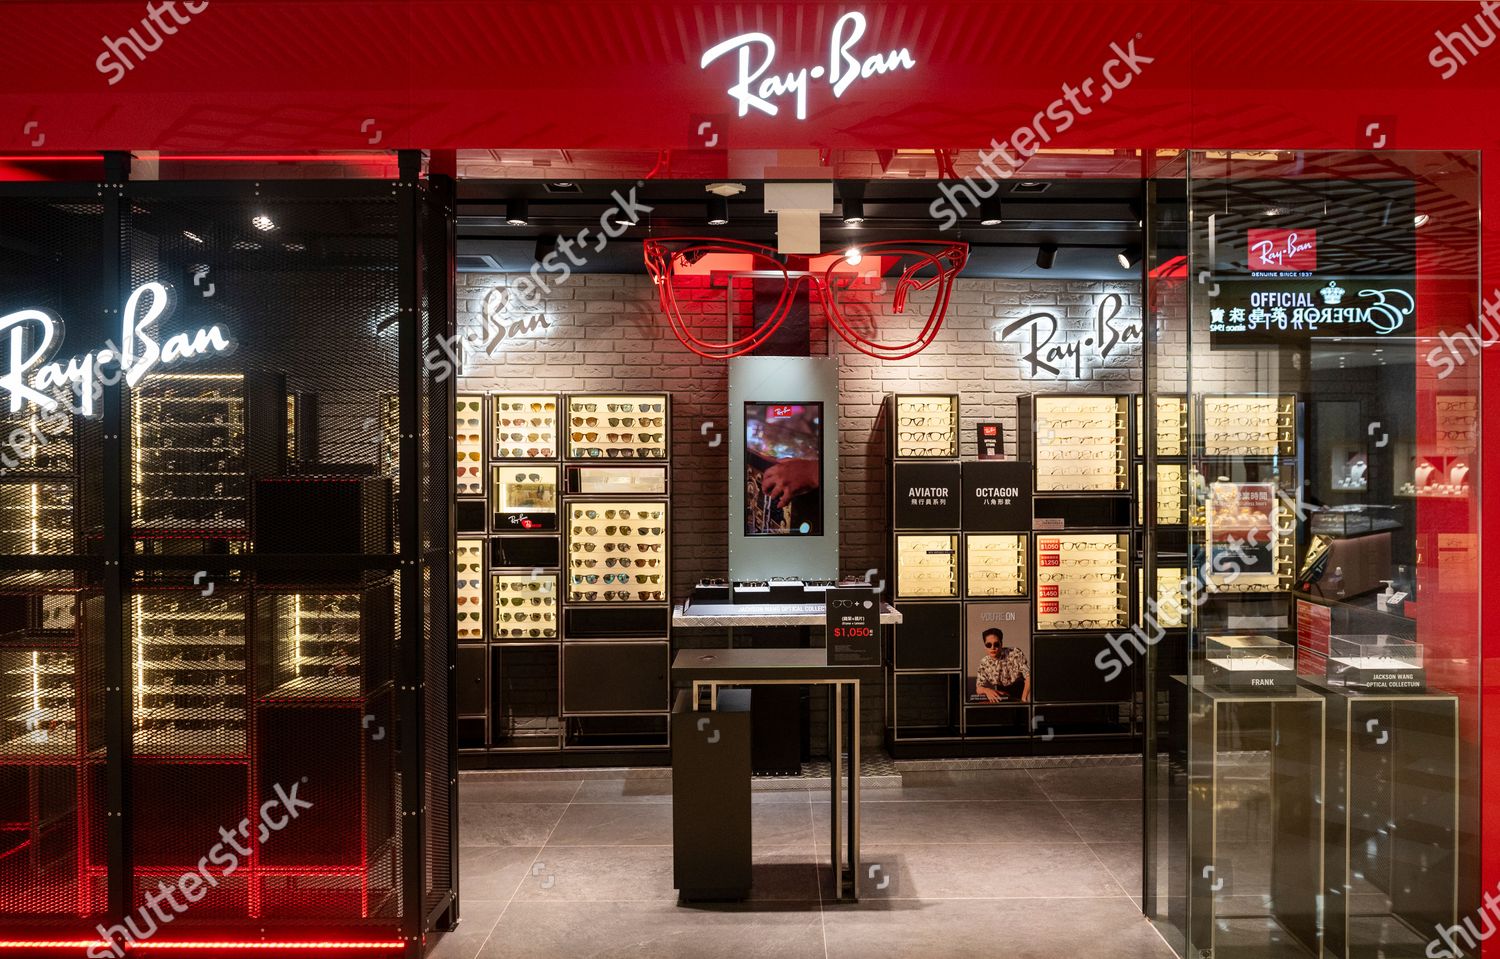 rayban official store